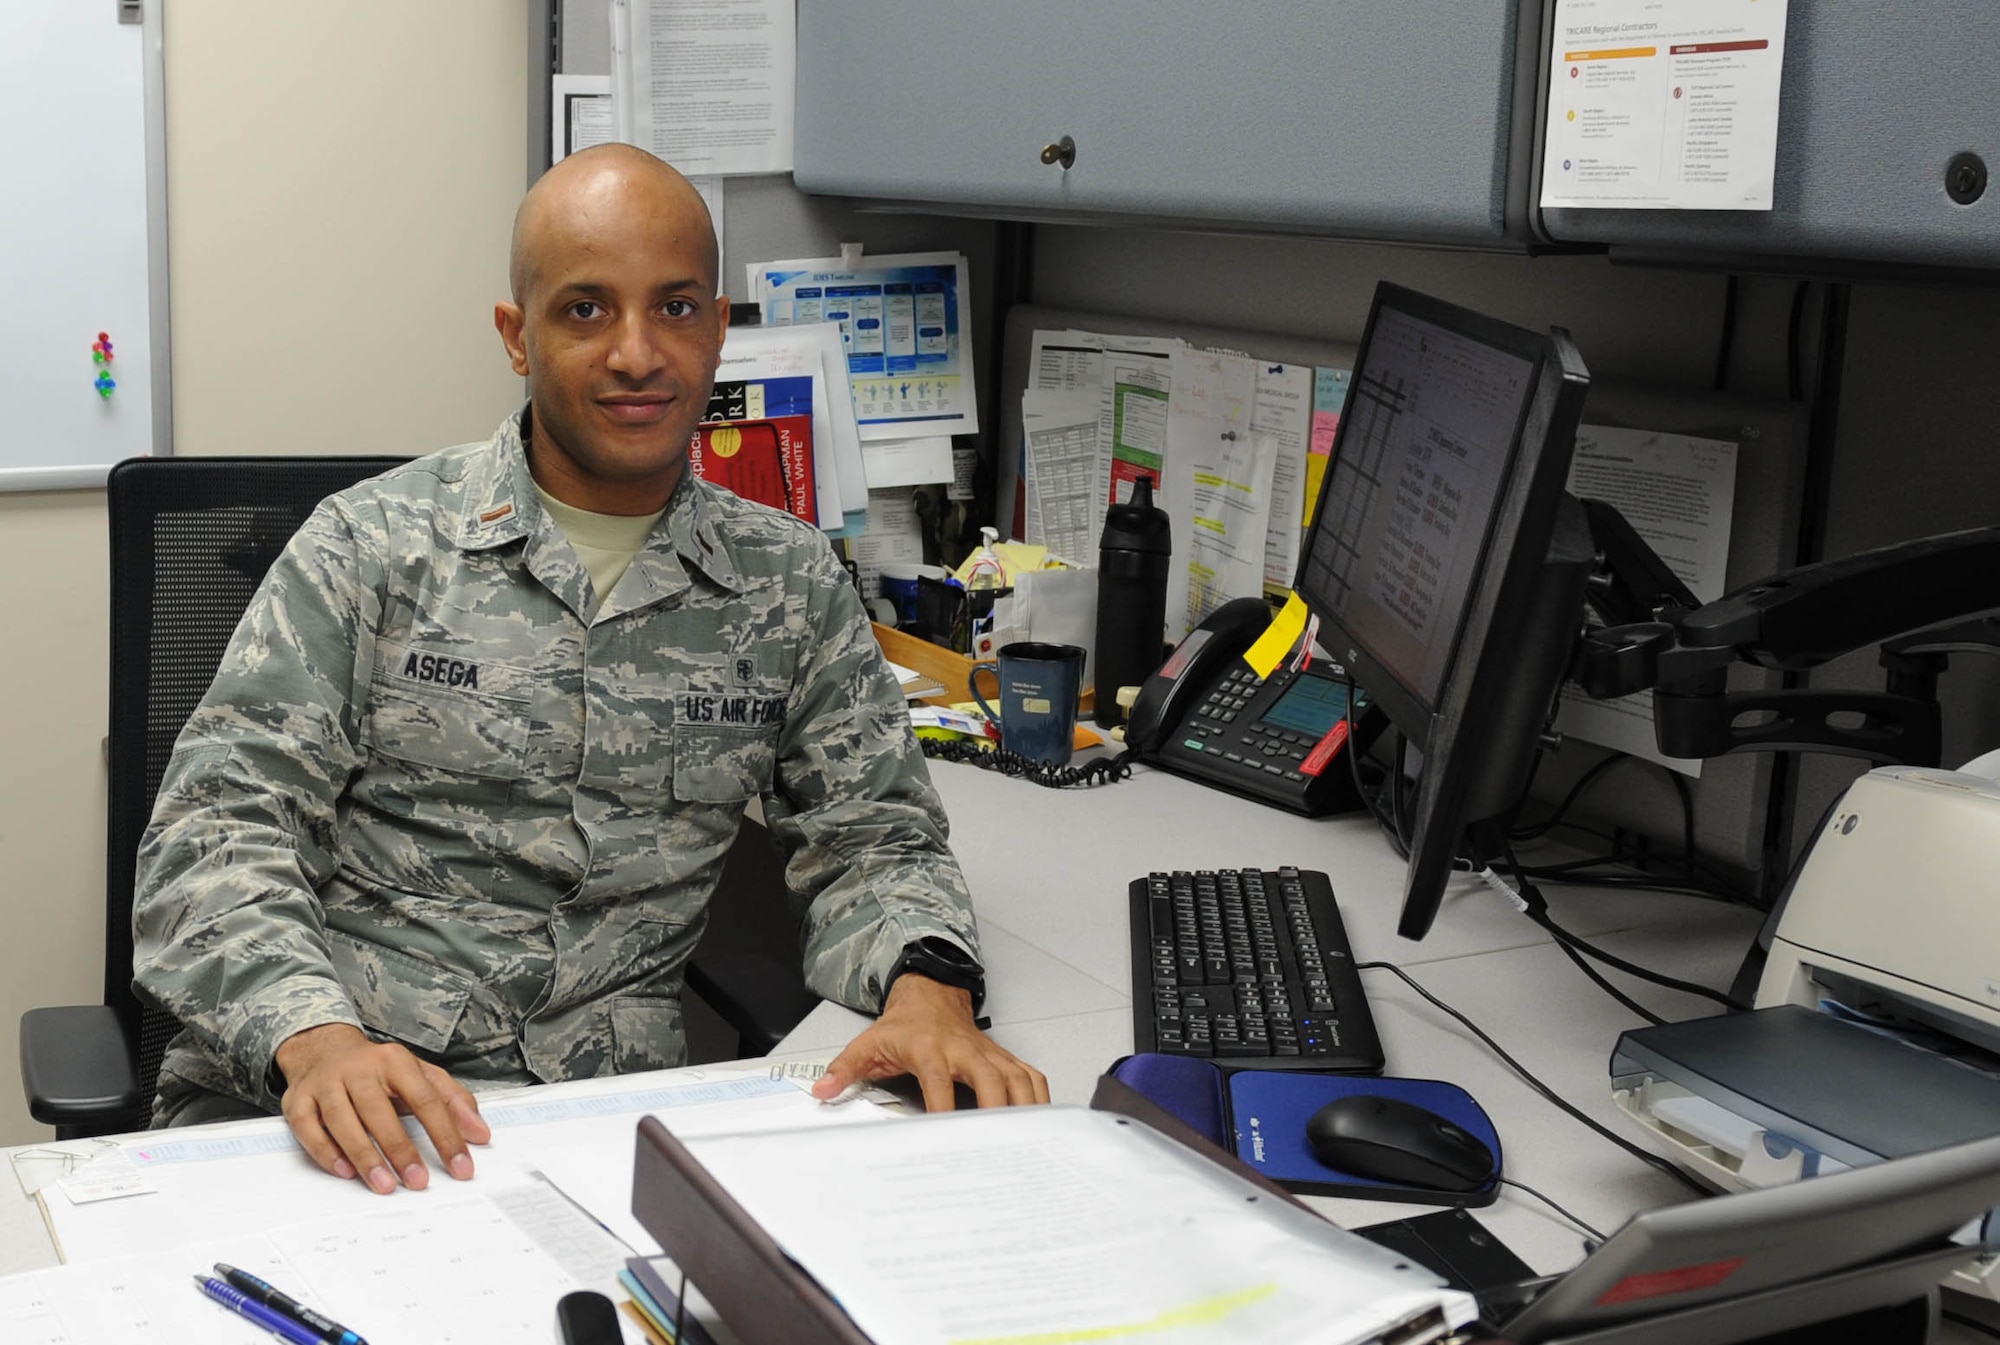 Second Lt. Ashenafi Asega, 22nd Medical Support Squadron TRICARE operations and patient administration flight commander sits at his desk, Nov. 4, 2016, at McConnell Air Force Base, Kan. Asega left Ethiopia to come to the United States when he was 22 years old to pursue an education and later joined the U.S. Air Force. (U.S. Air Force photo/Senior Airman Tara Fadenrecht)